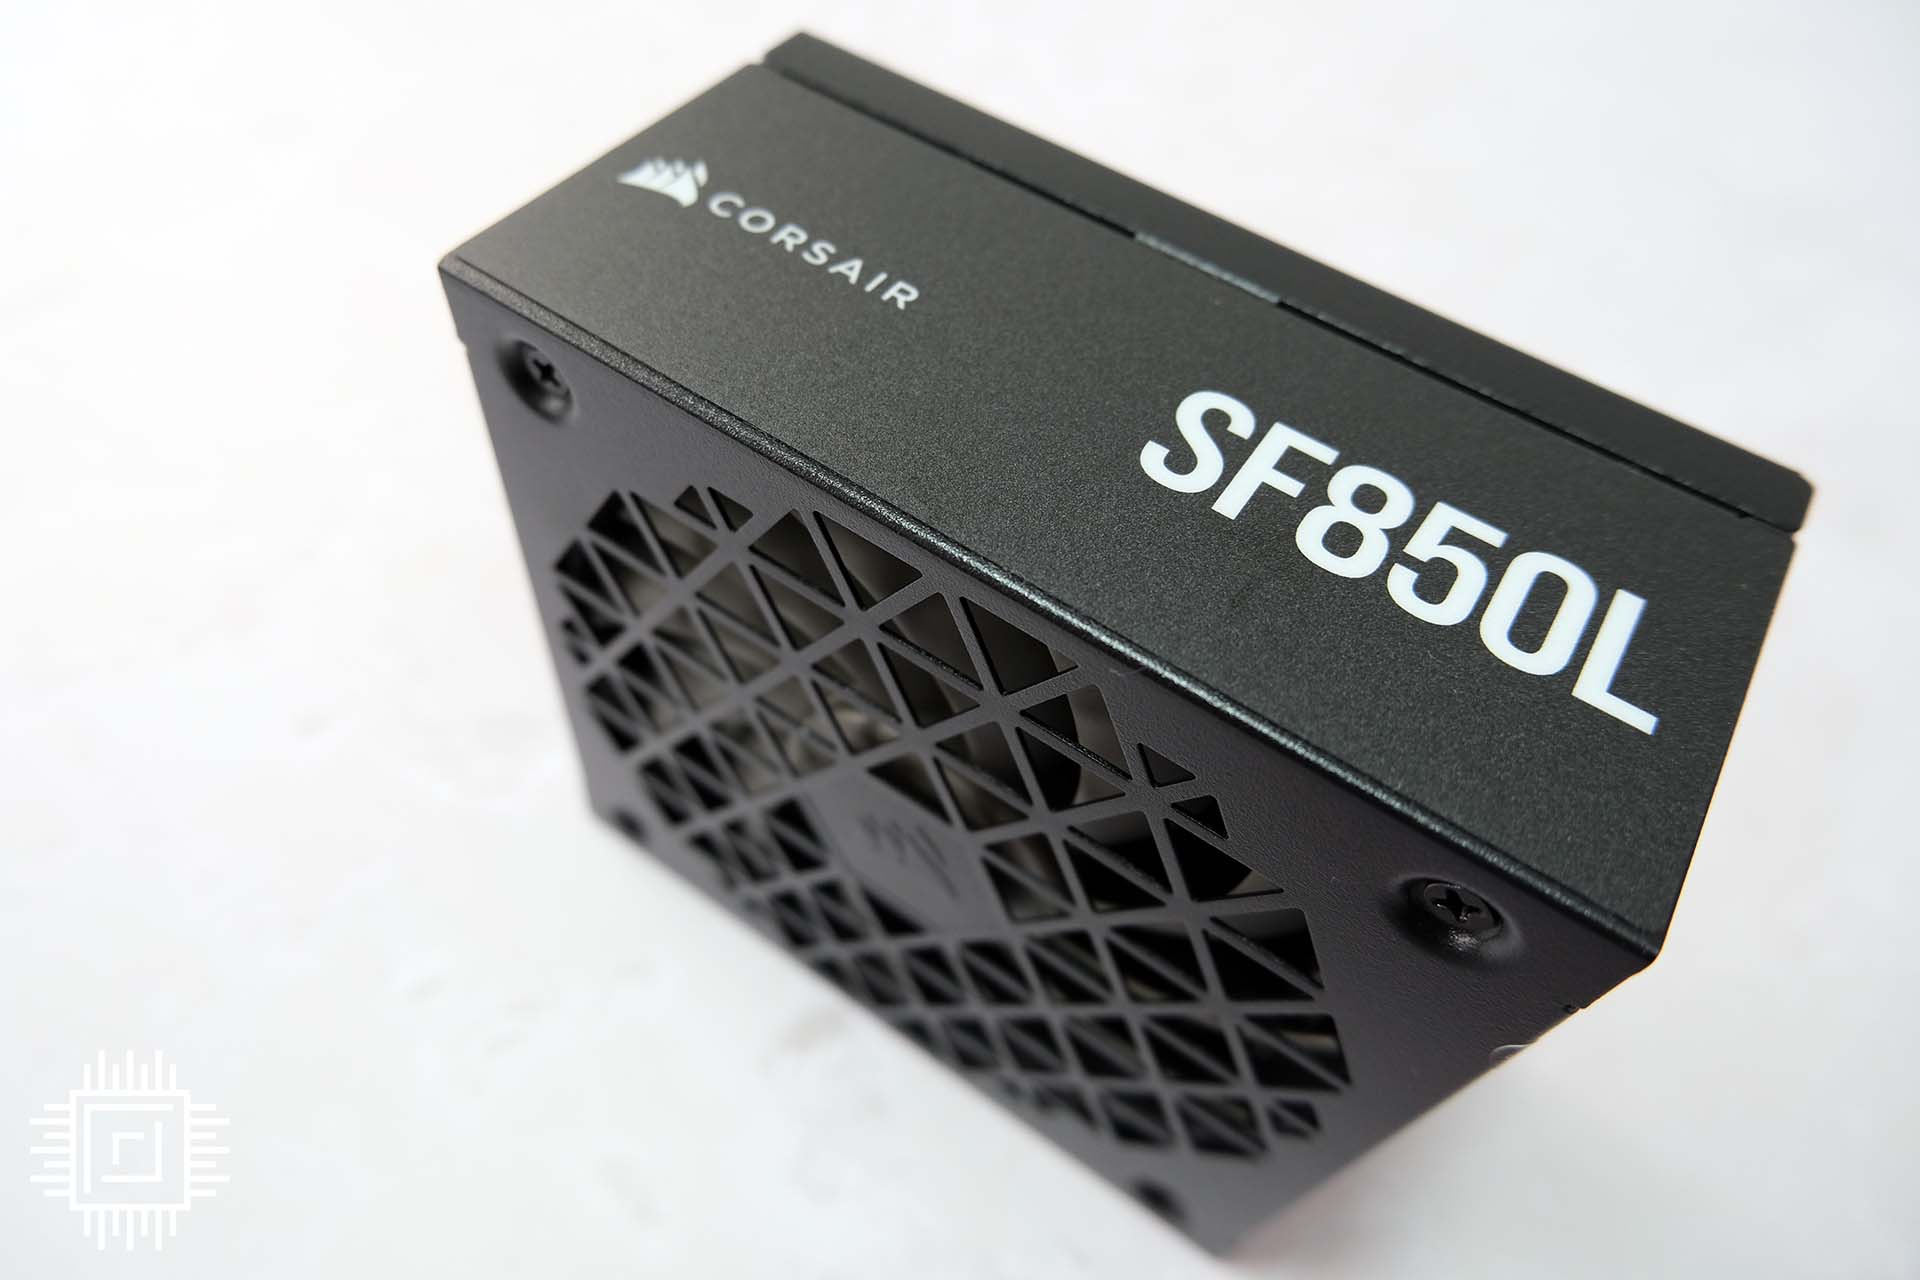 The Corsair SF850L as seen when photographed from the side.